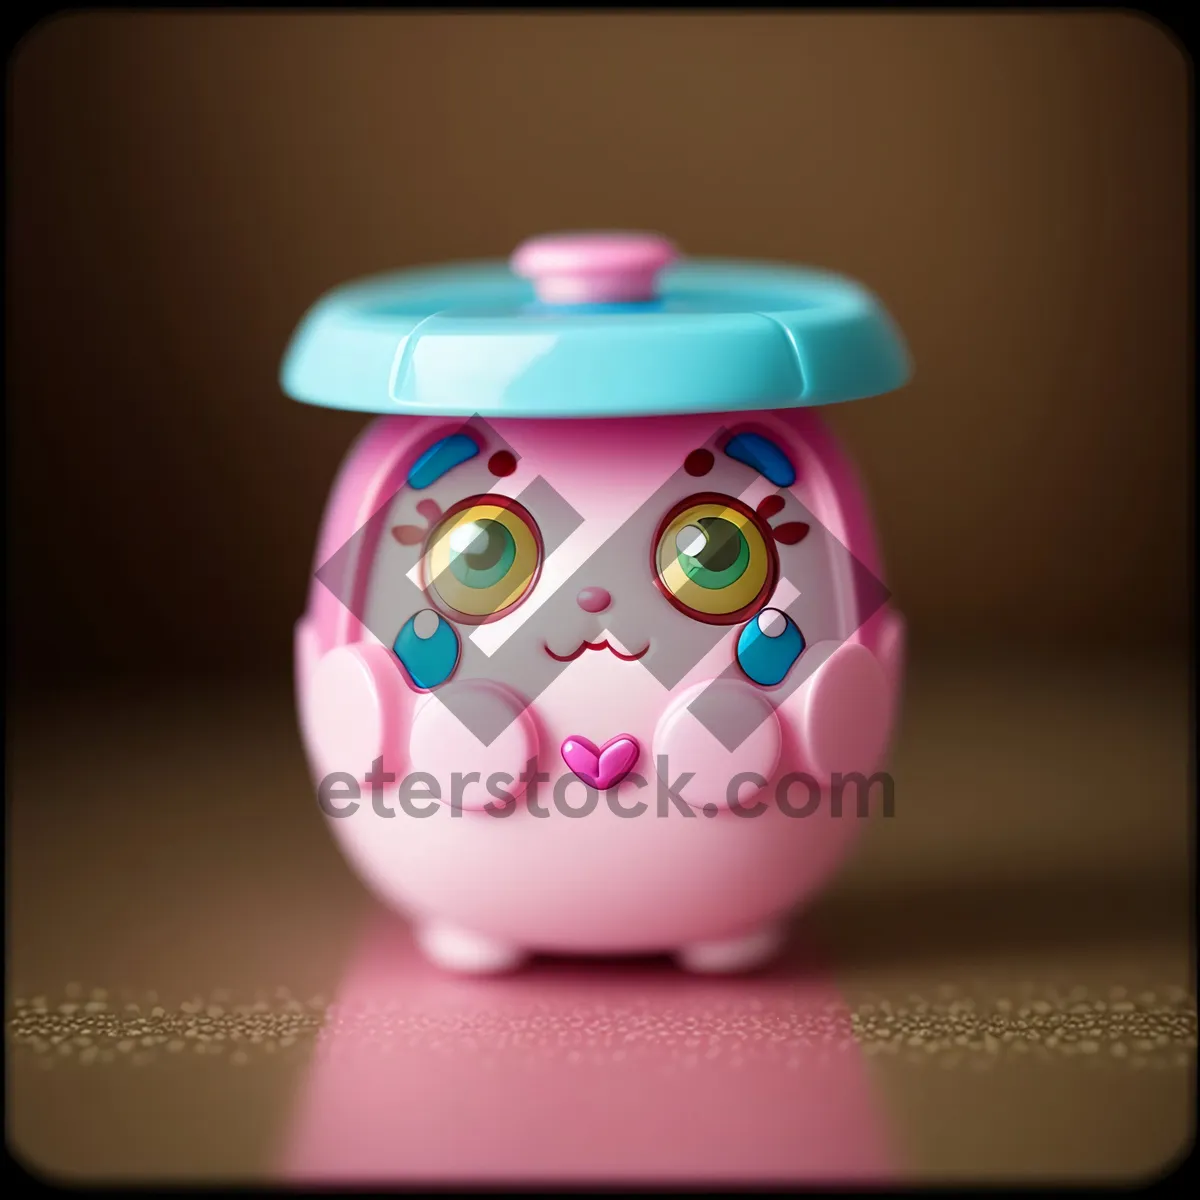 Picture of Playful Piggy Bank: Toy Teapot Savings Container